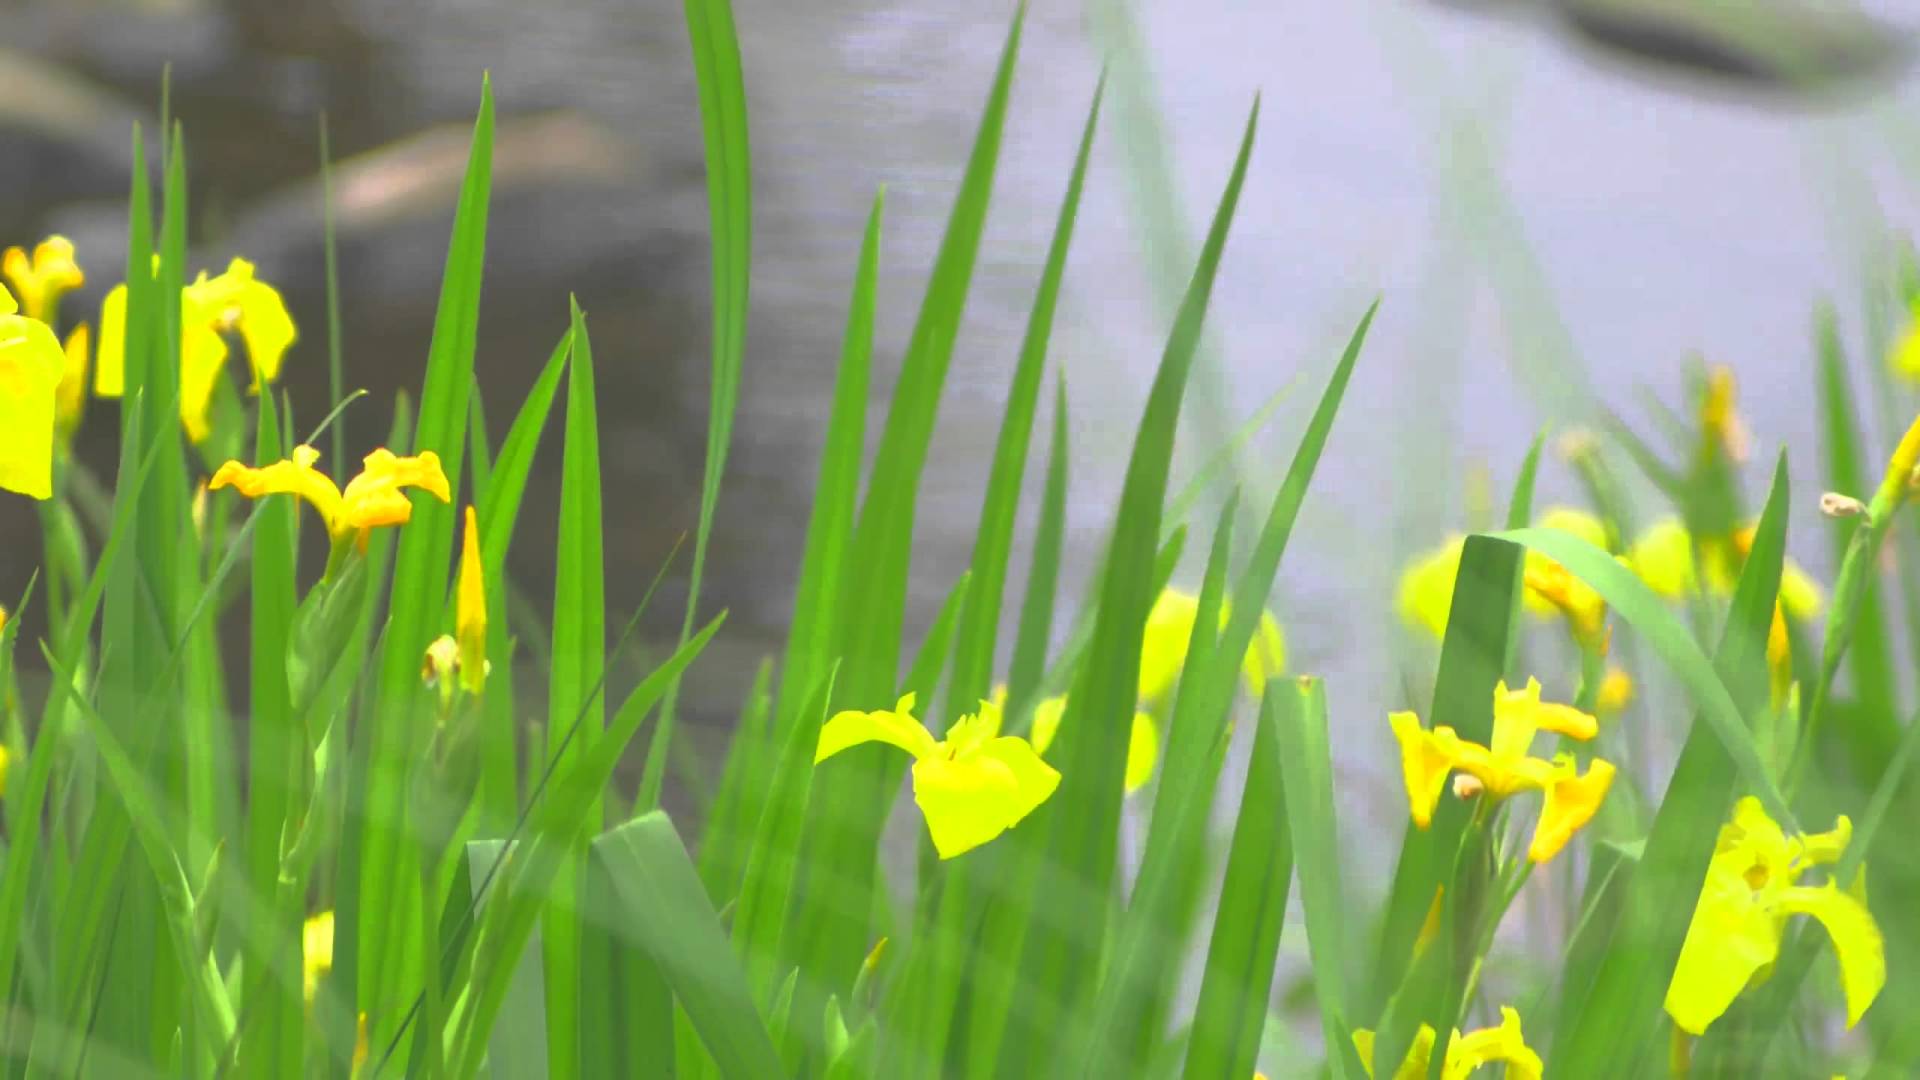 Colorful Spring 3 - Video Background HD 1080p - YouTube